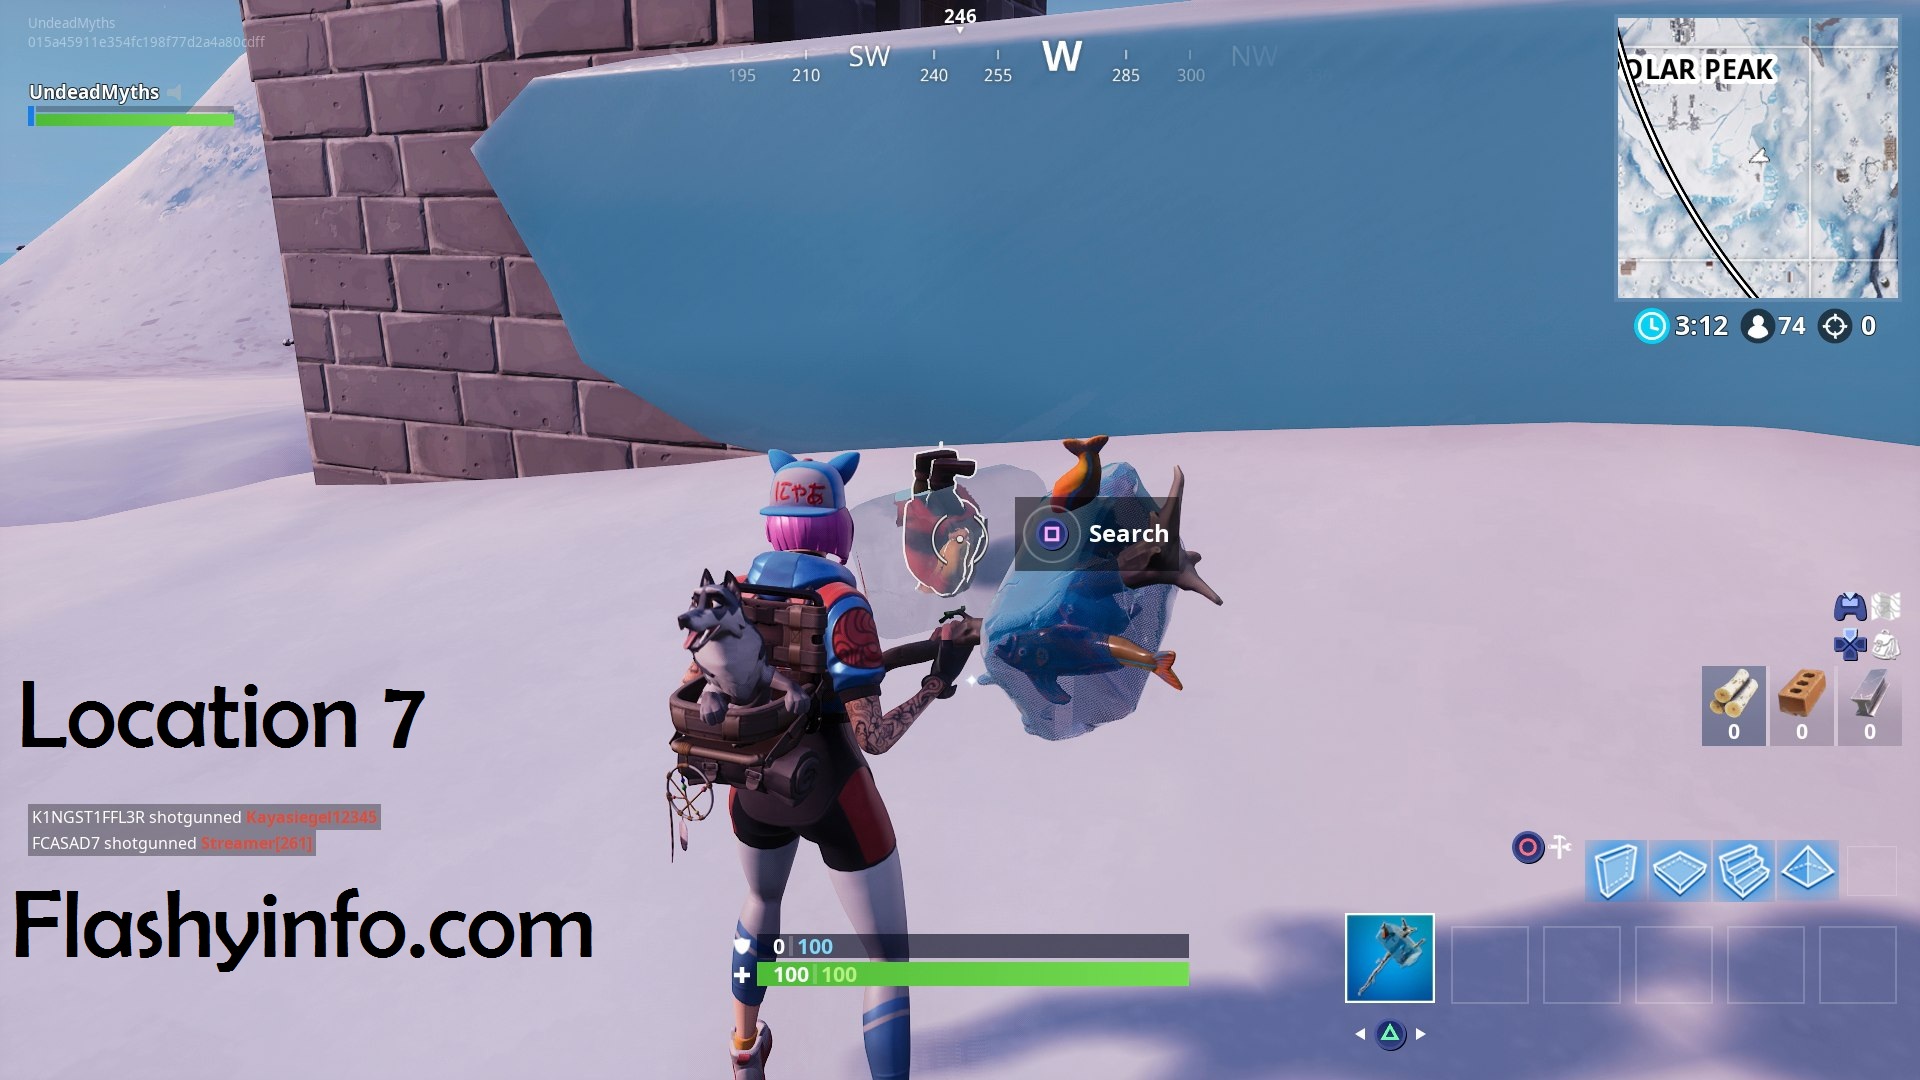 Fortnite Chilly Gnomes Location 7